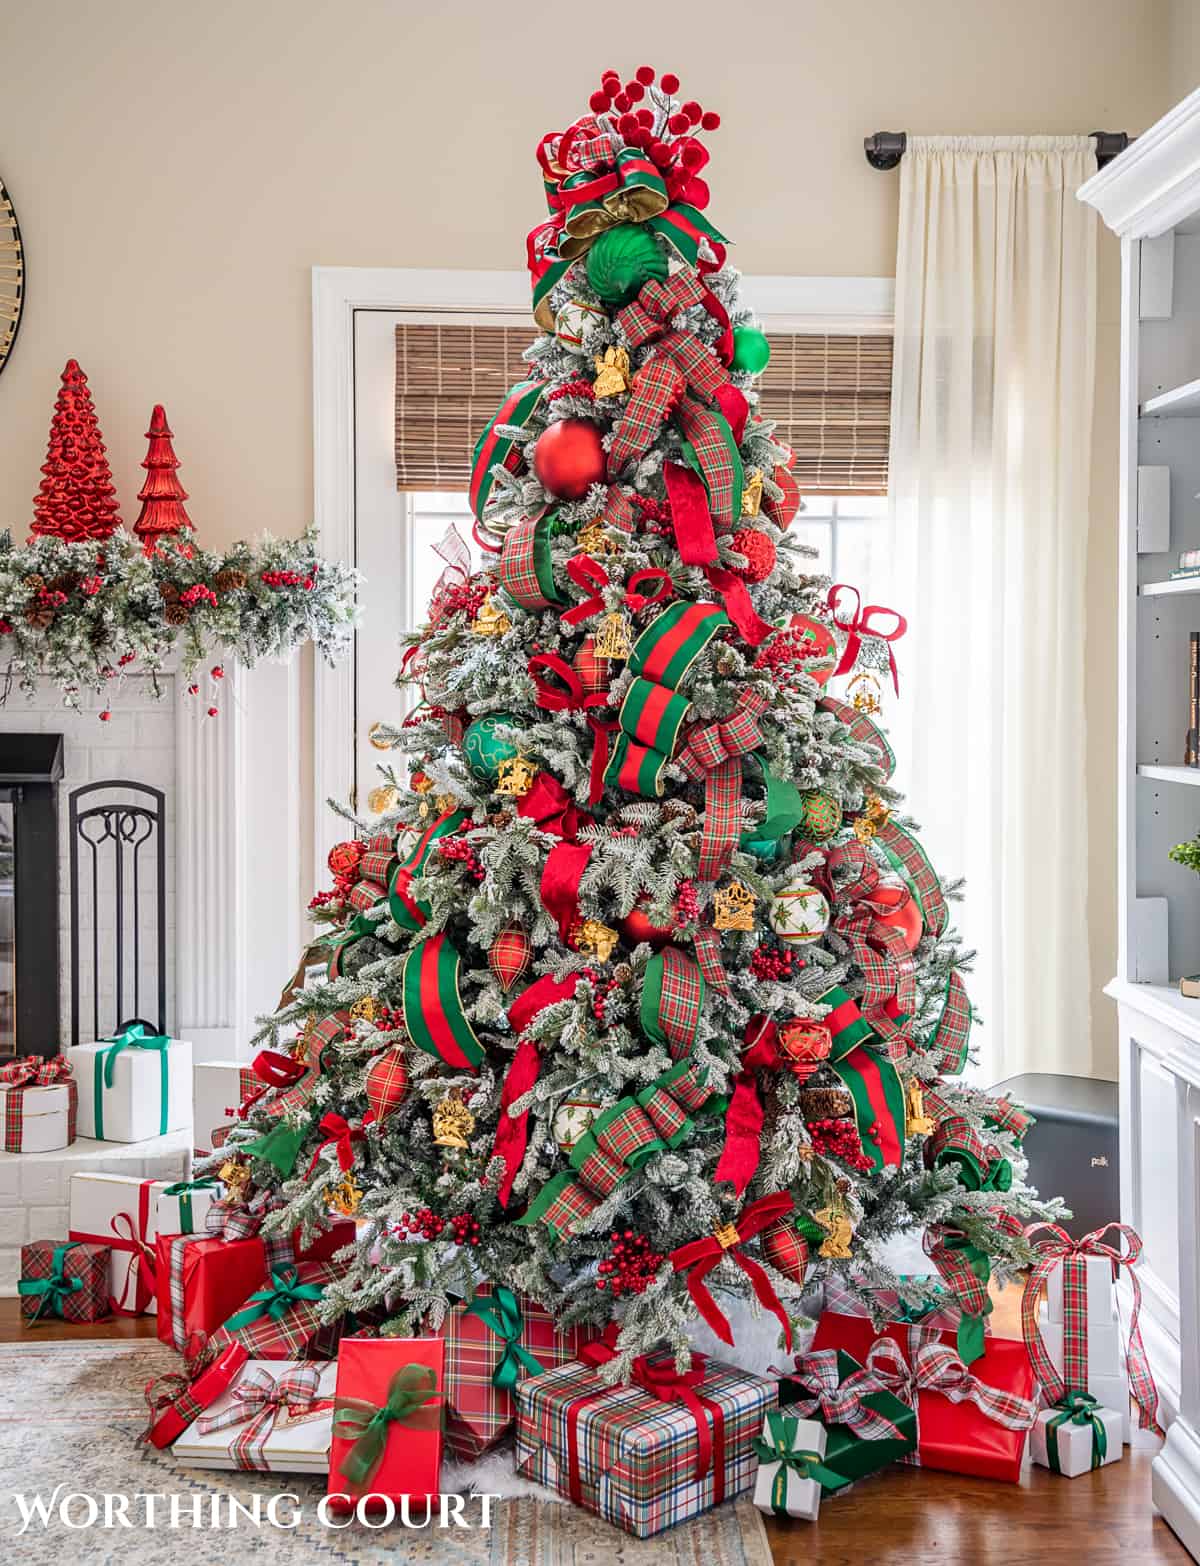 Christmas tree with red and green decorations